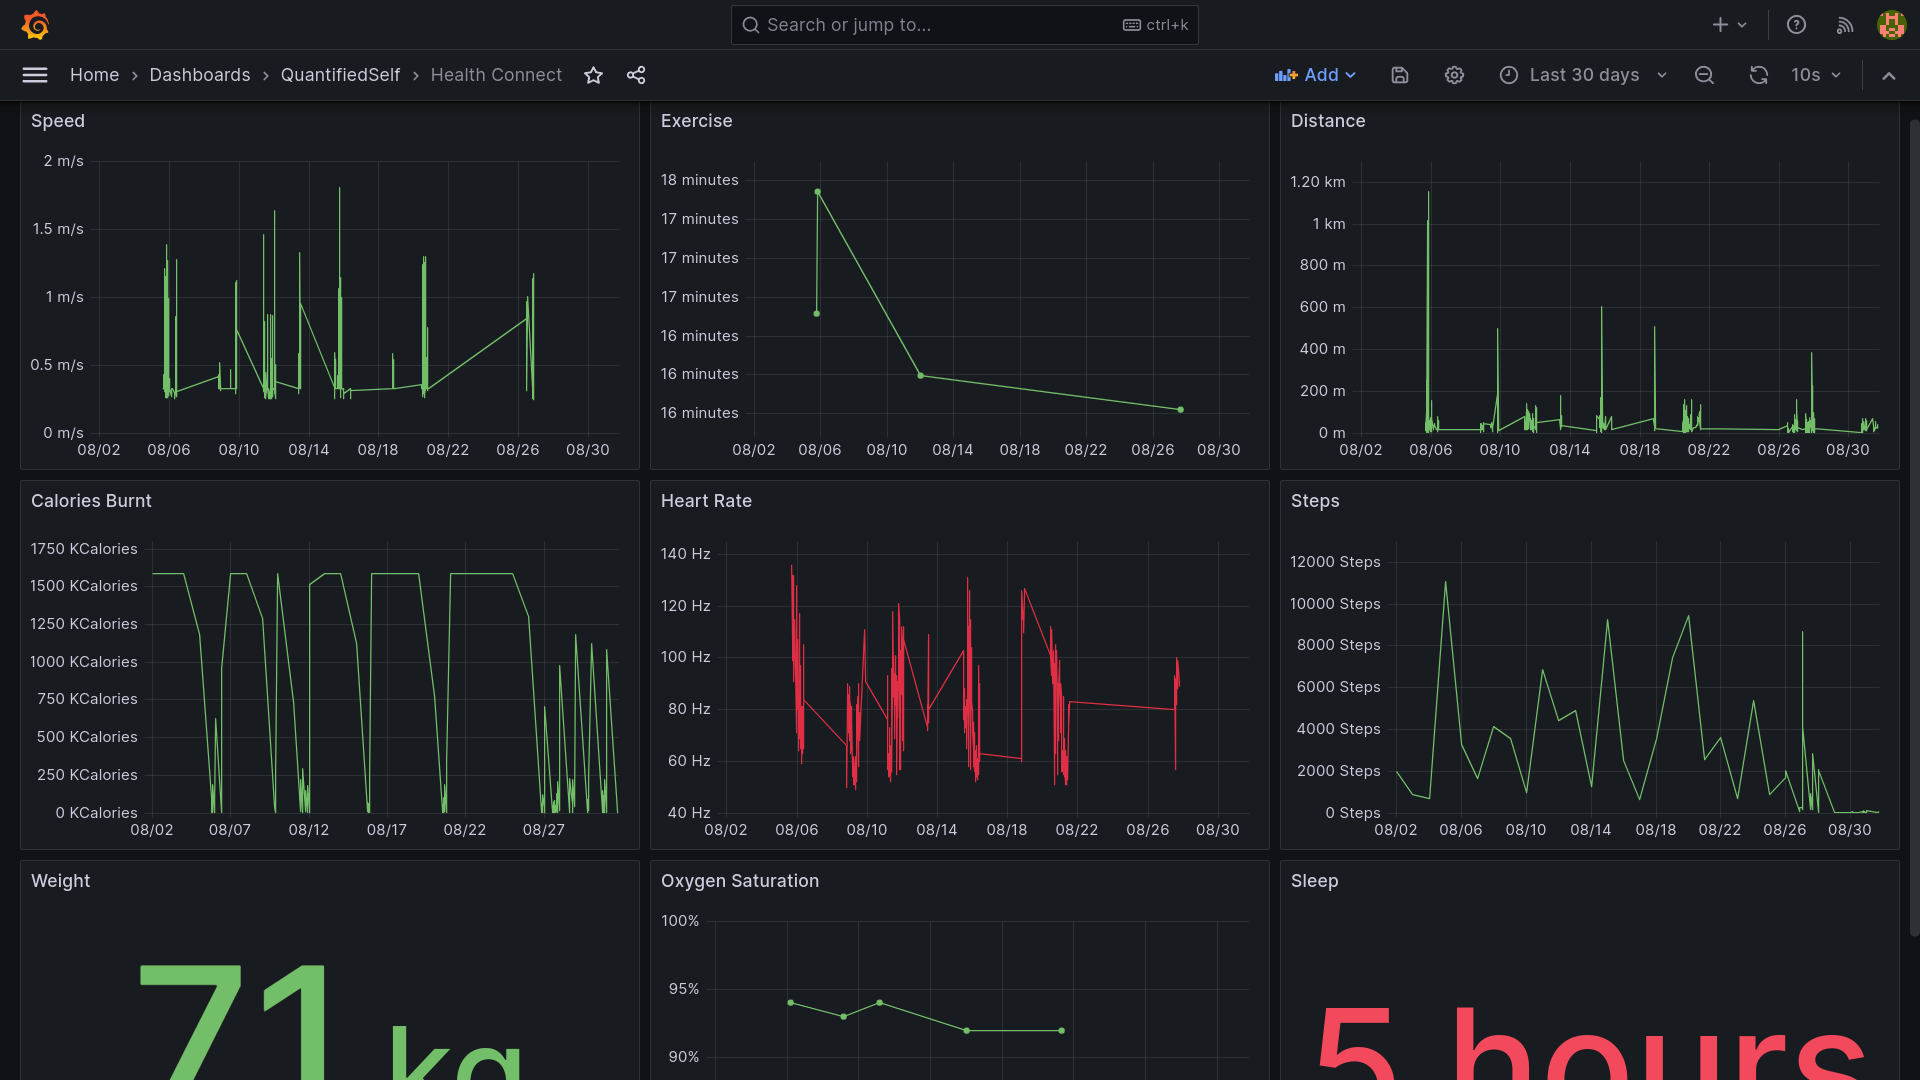 Grafana Dashboard based on Android Health Connect data